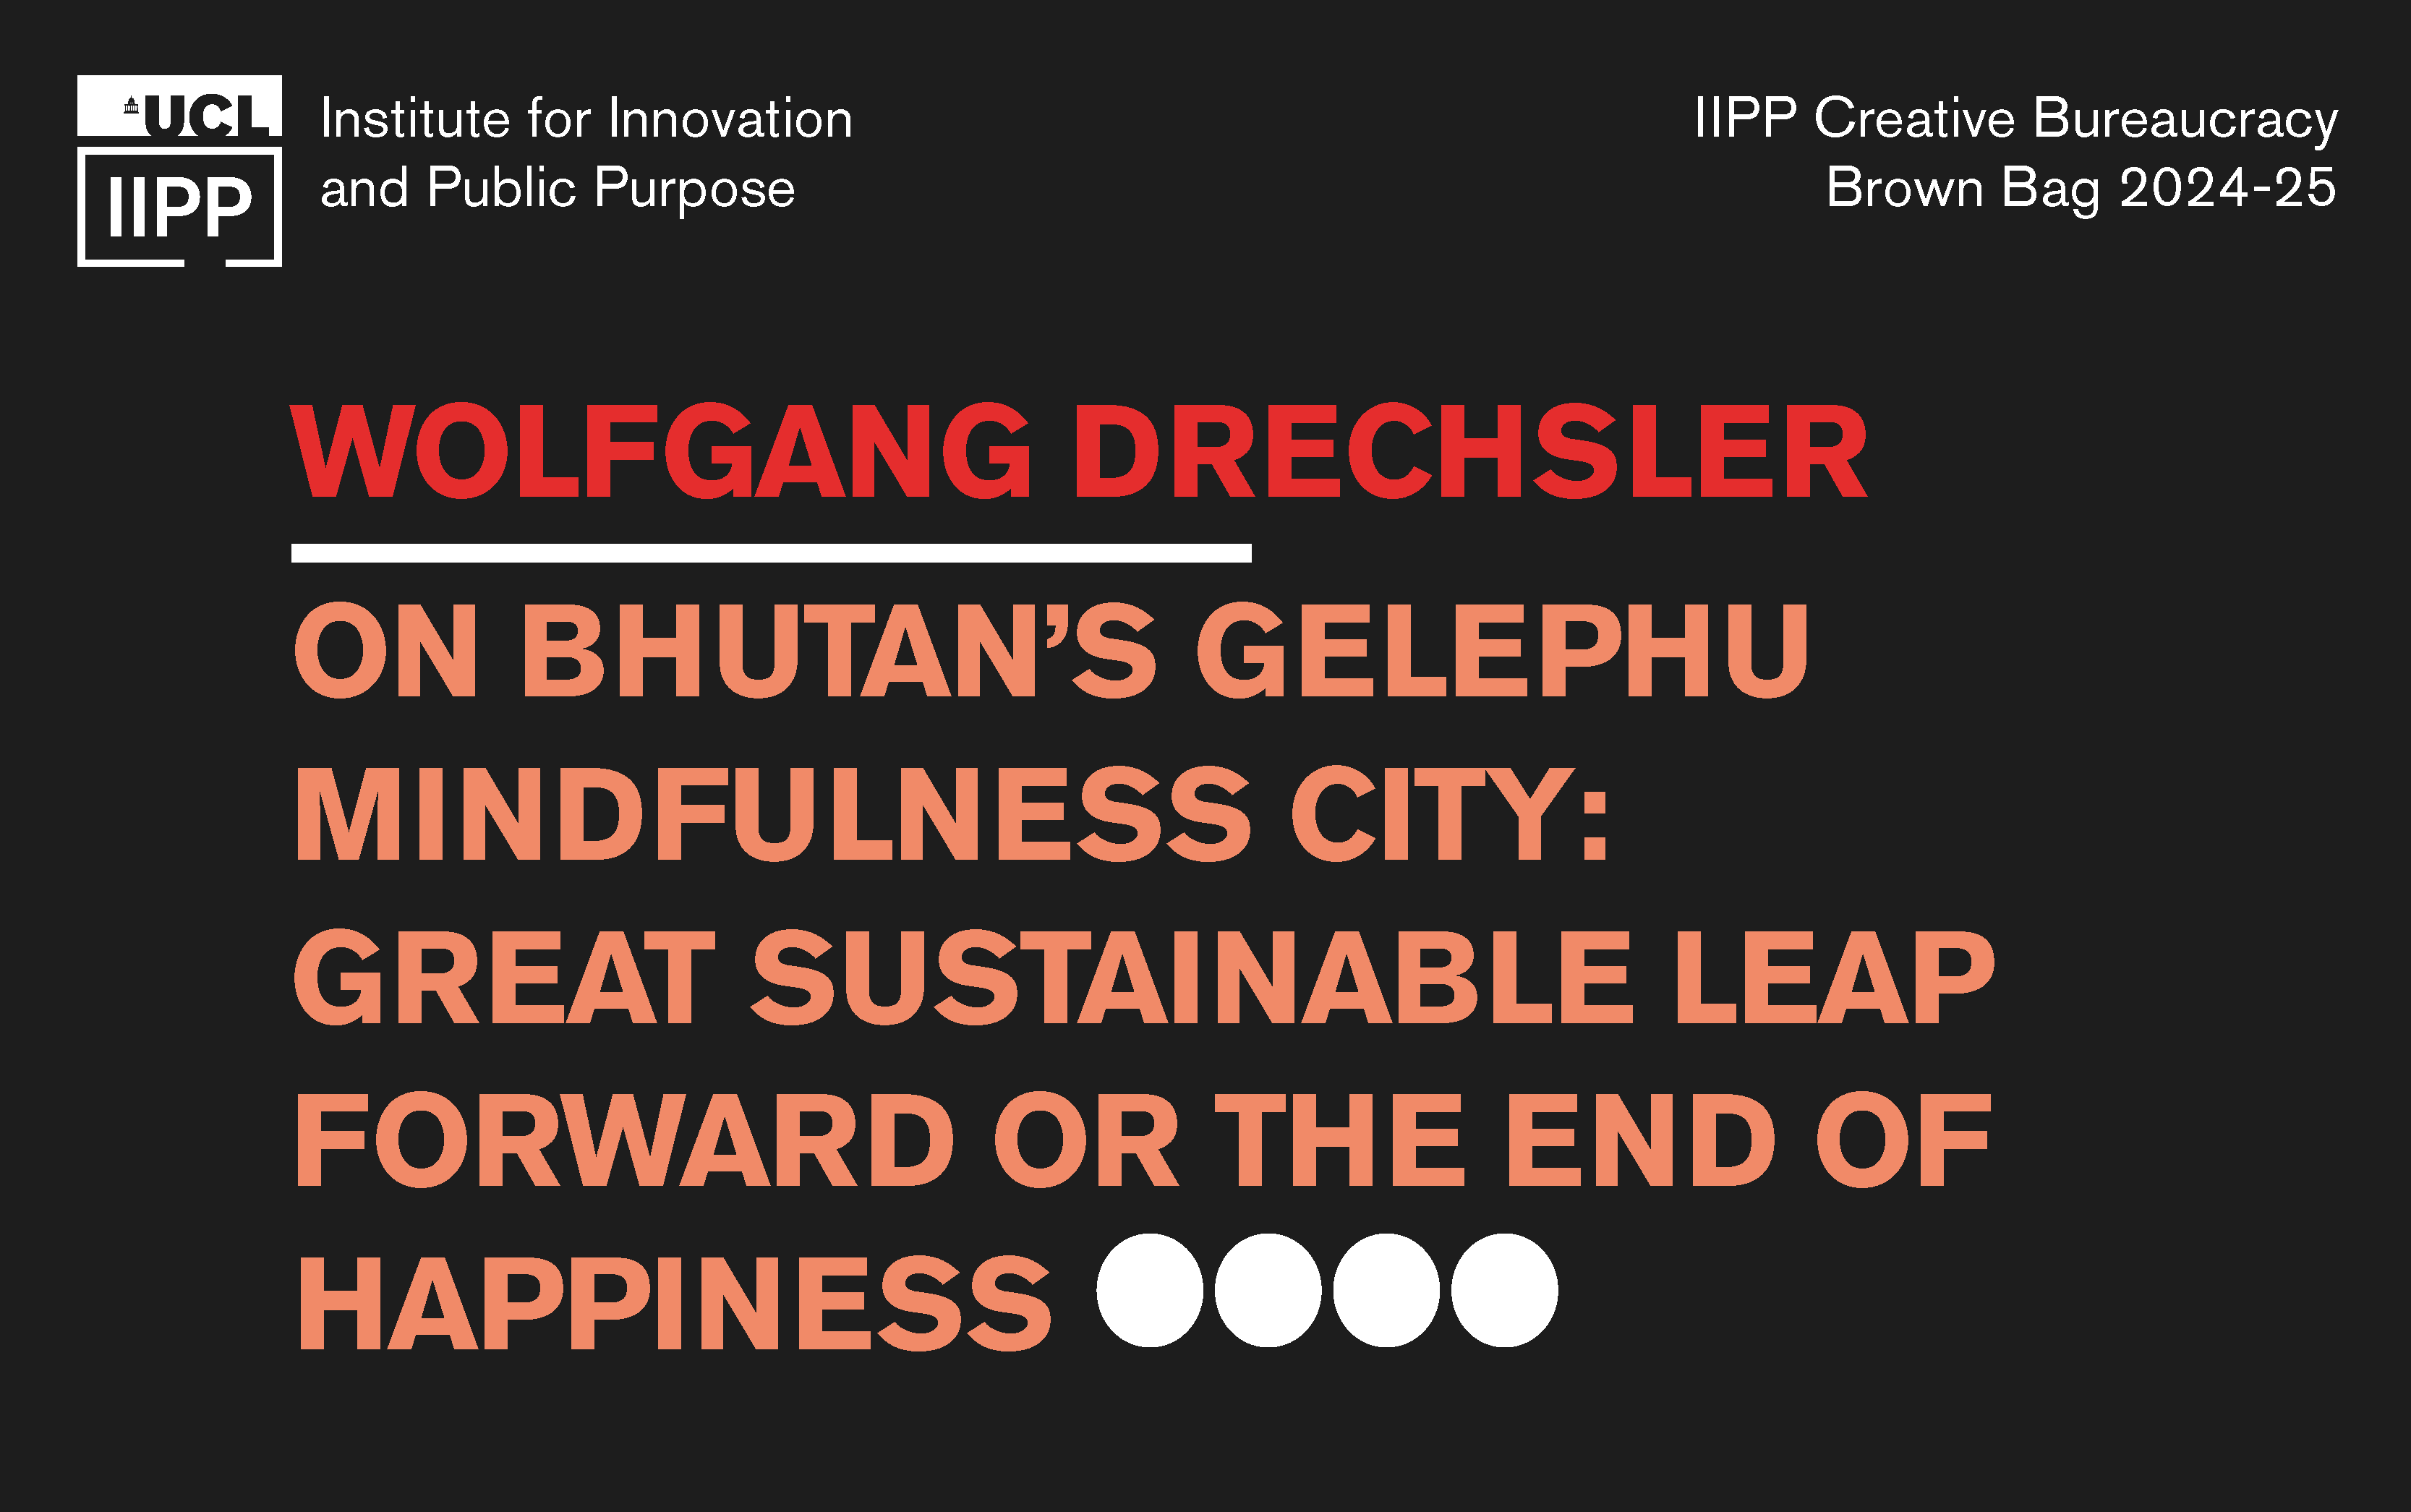 WOLFGANG DRECHSLER   ON BHUTAN’S GELEPHU MINDFULNESS CITY: GREAT SUSTAINABLE LEAP FORWARD OR THE END OF HAPPINESS